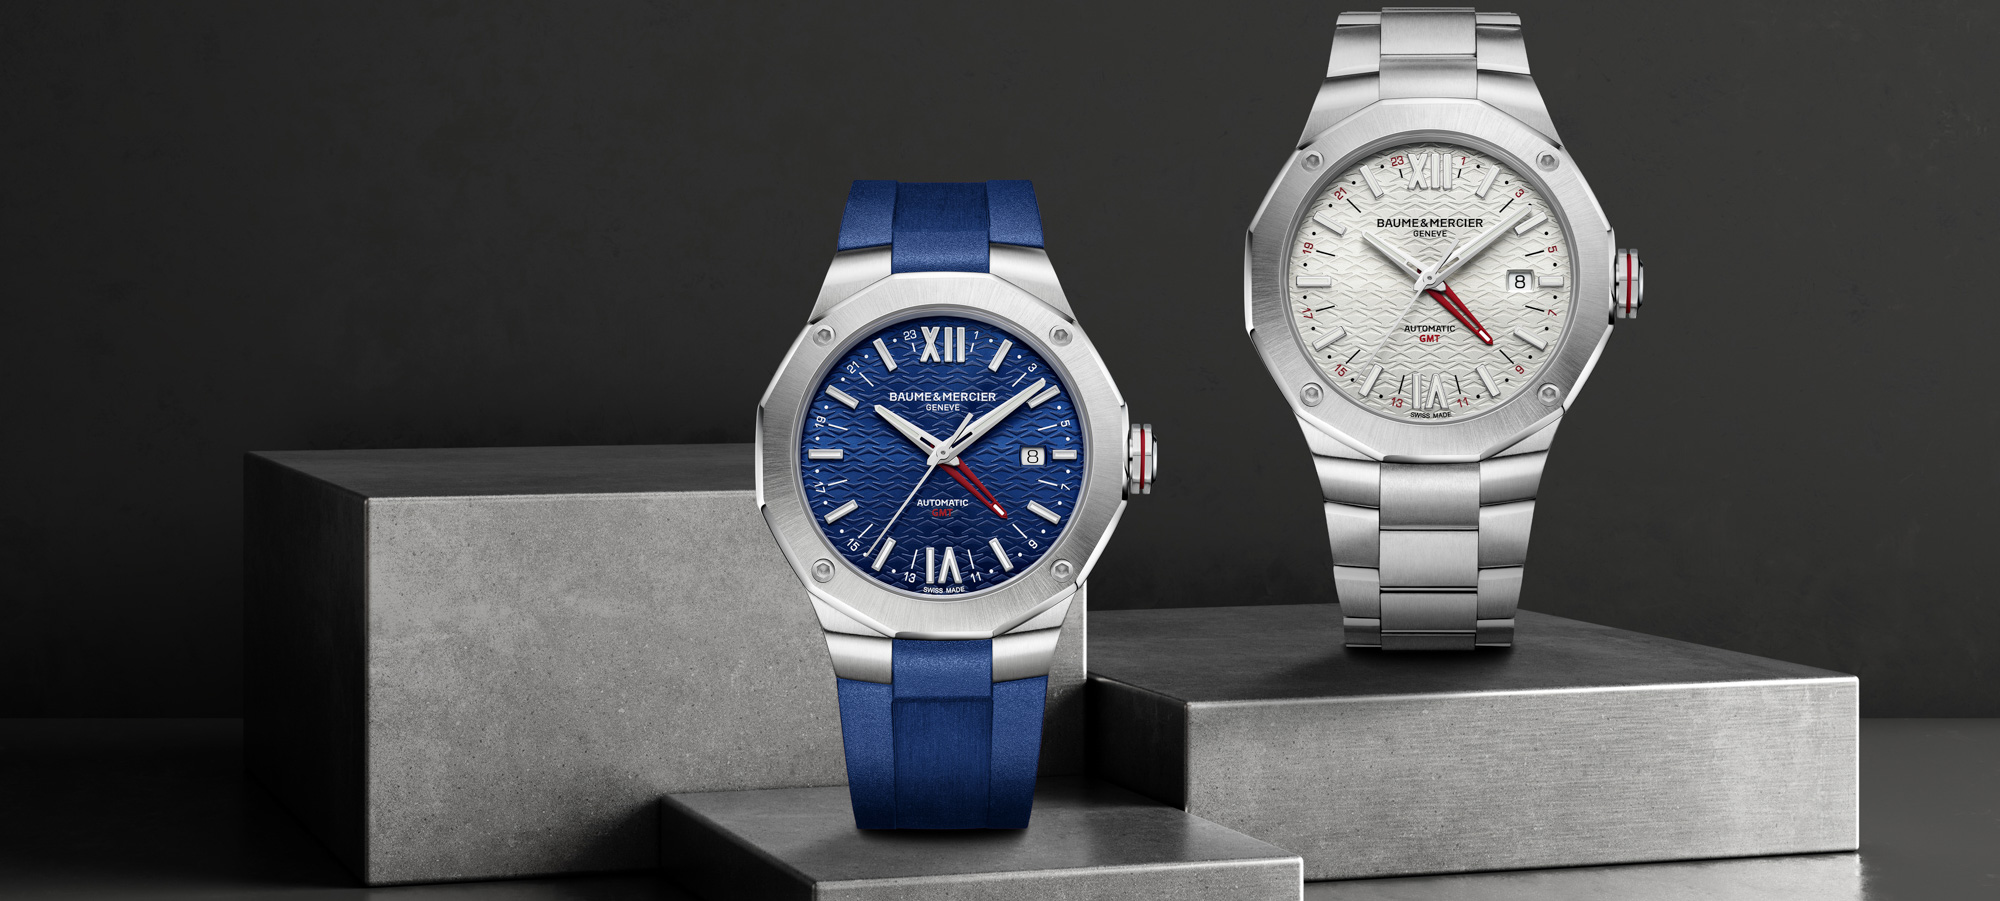 Baume & Mercier Adds A GMT To The Riviera Watch Collection